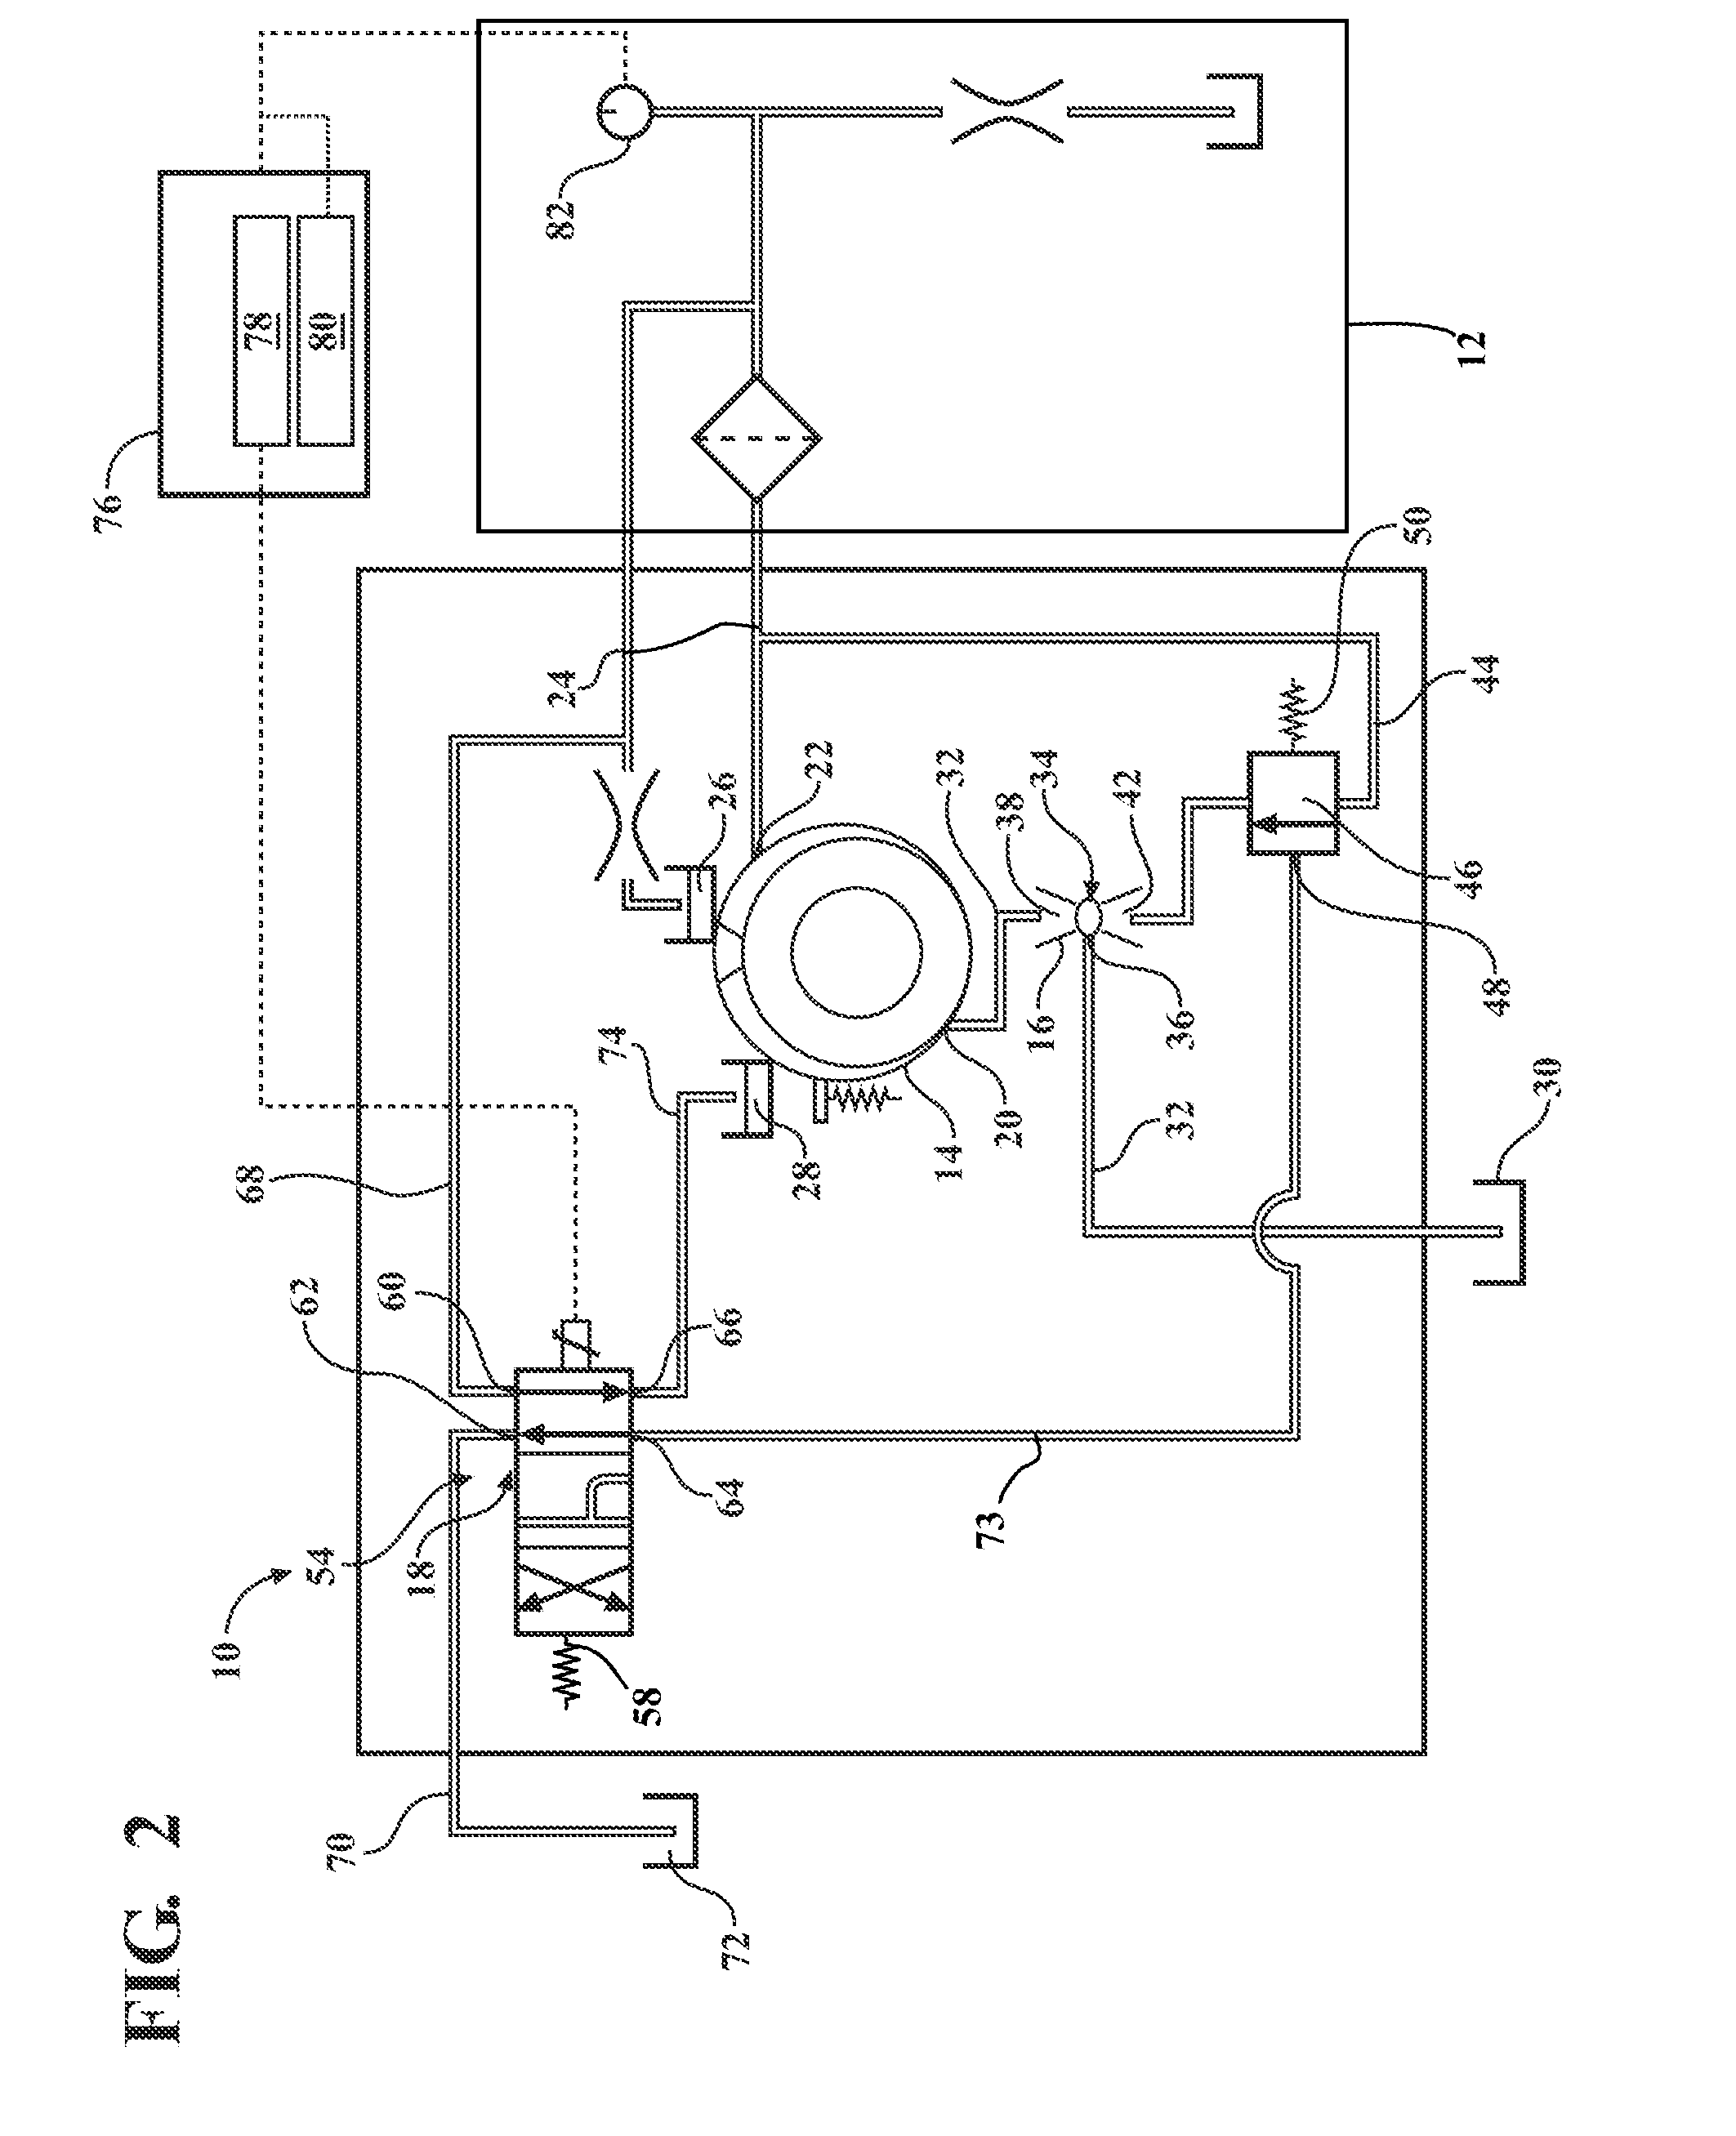 Lubrication system and method configured for supplying pressurized oil to an engine